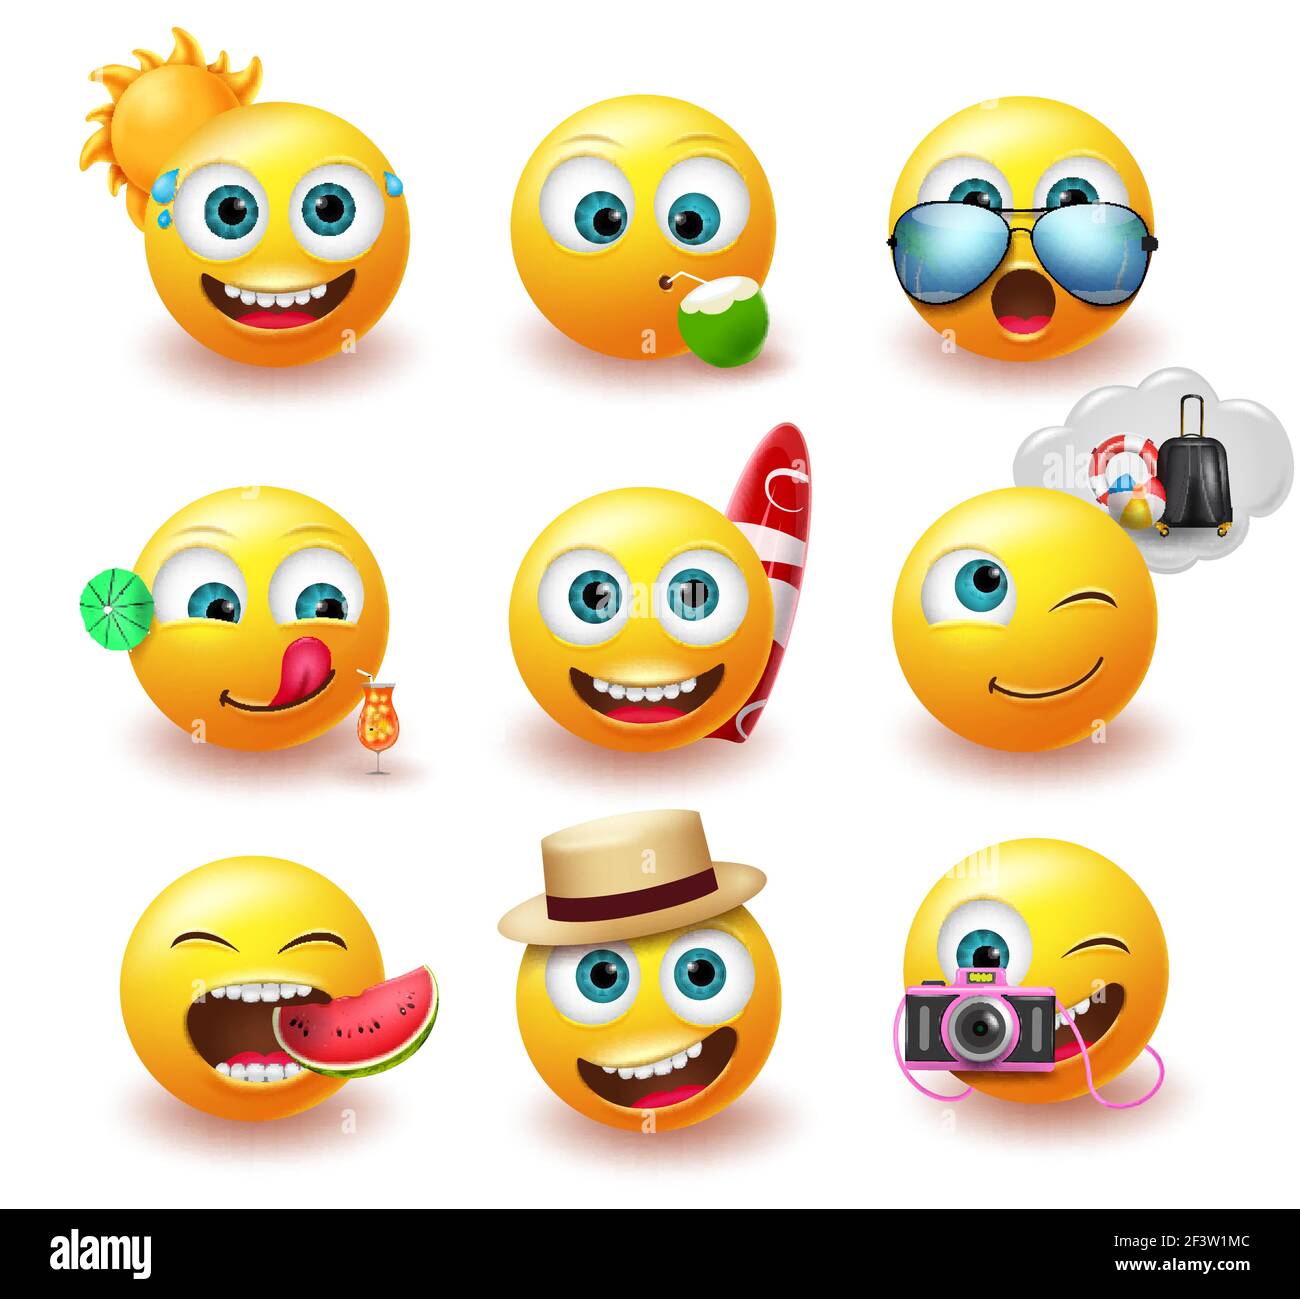 Smileys summer emoticon vector set. Smiley yellow icon emoji with facial expression and beach element for tropical season character emoticons. Stock Vector